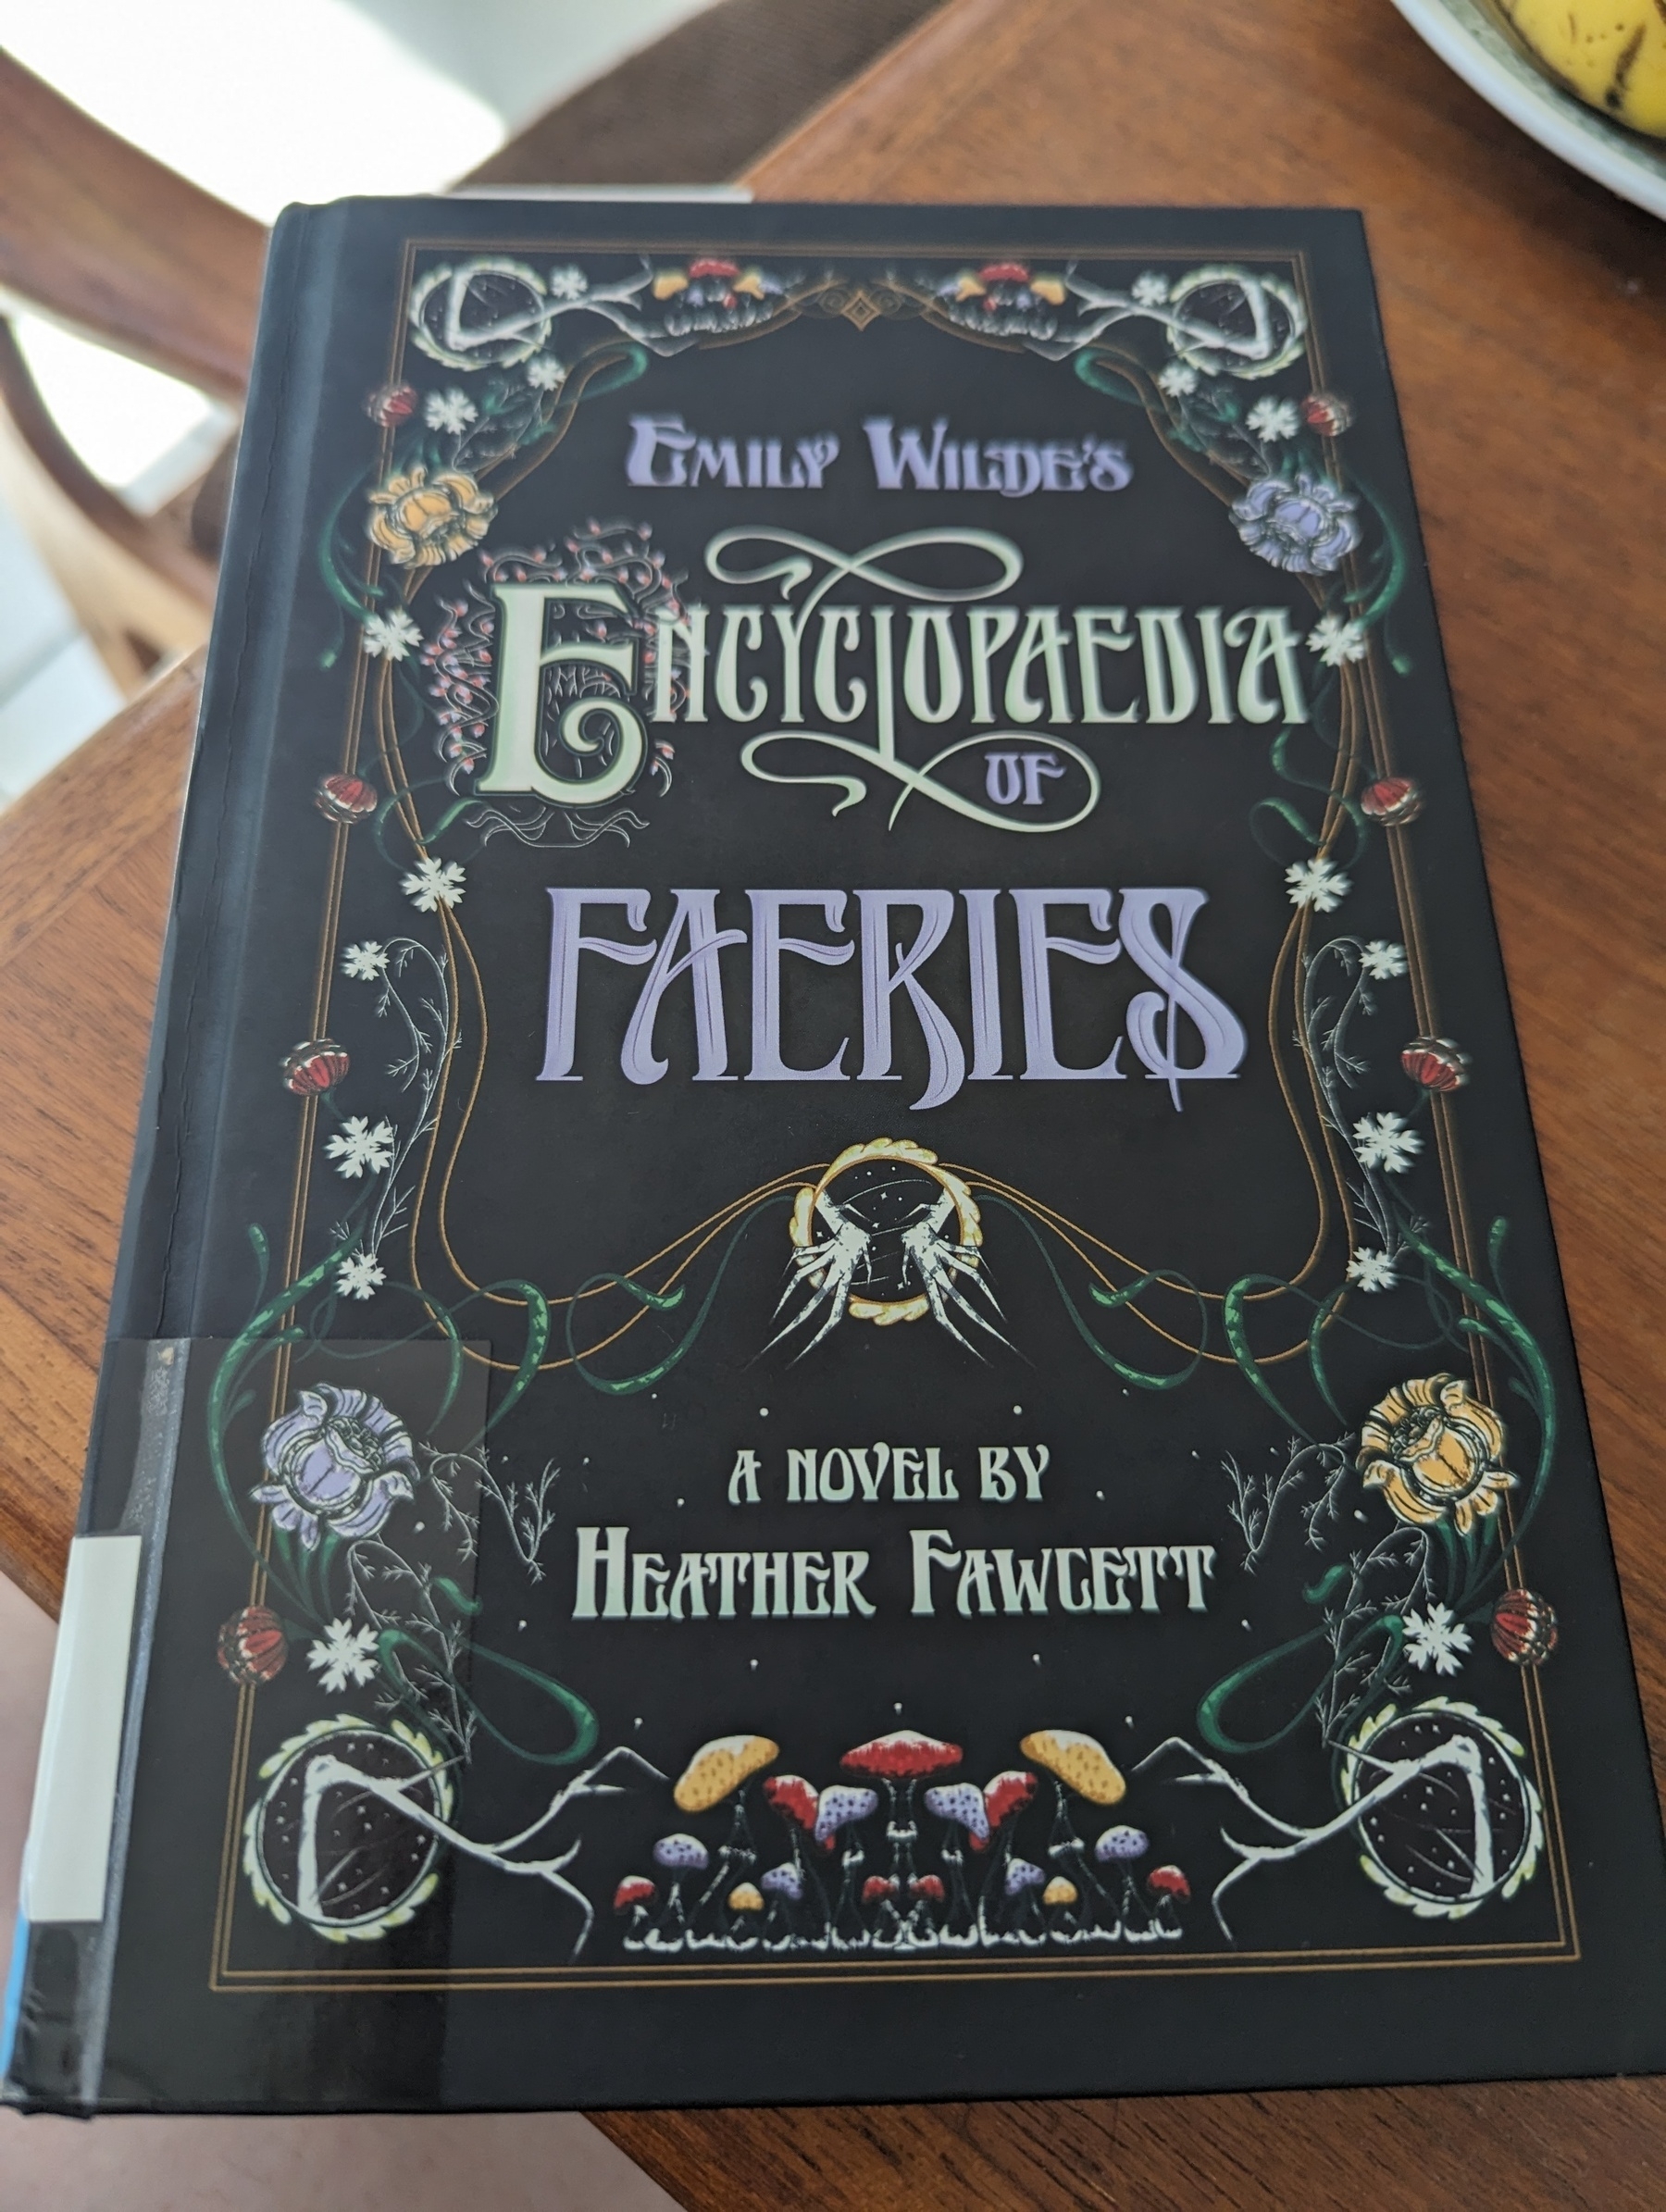 The book Emily Wilde's Encyclopedia of Faeries by Hannah Fawcett